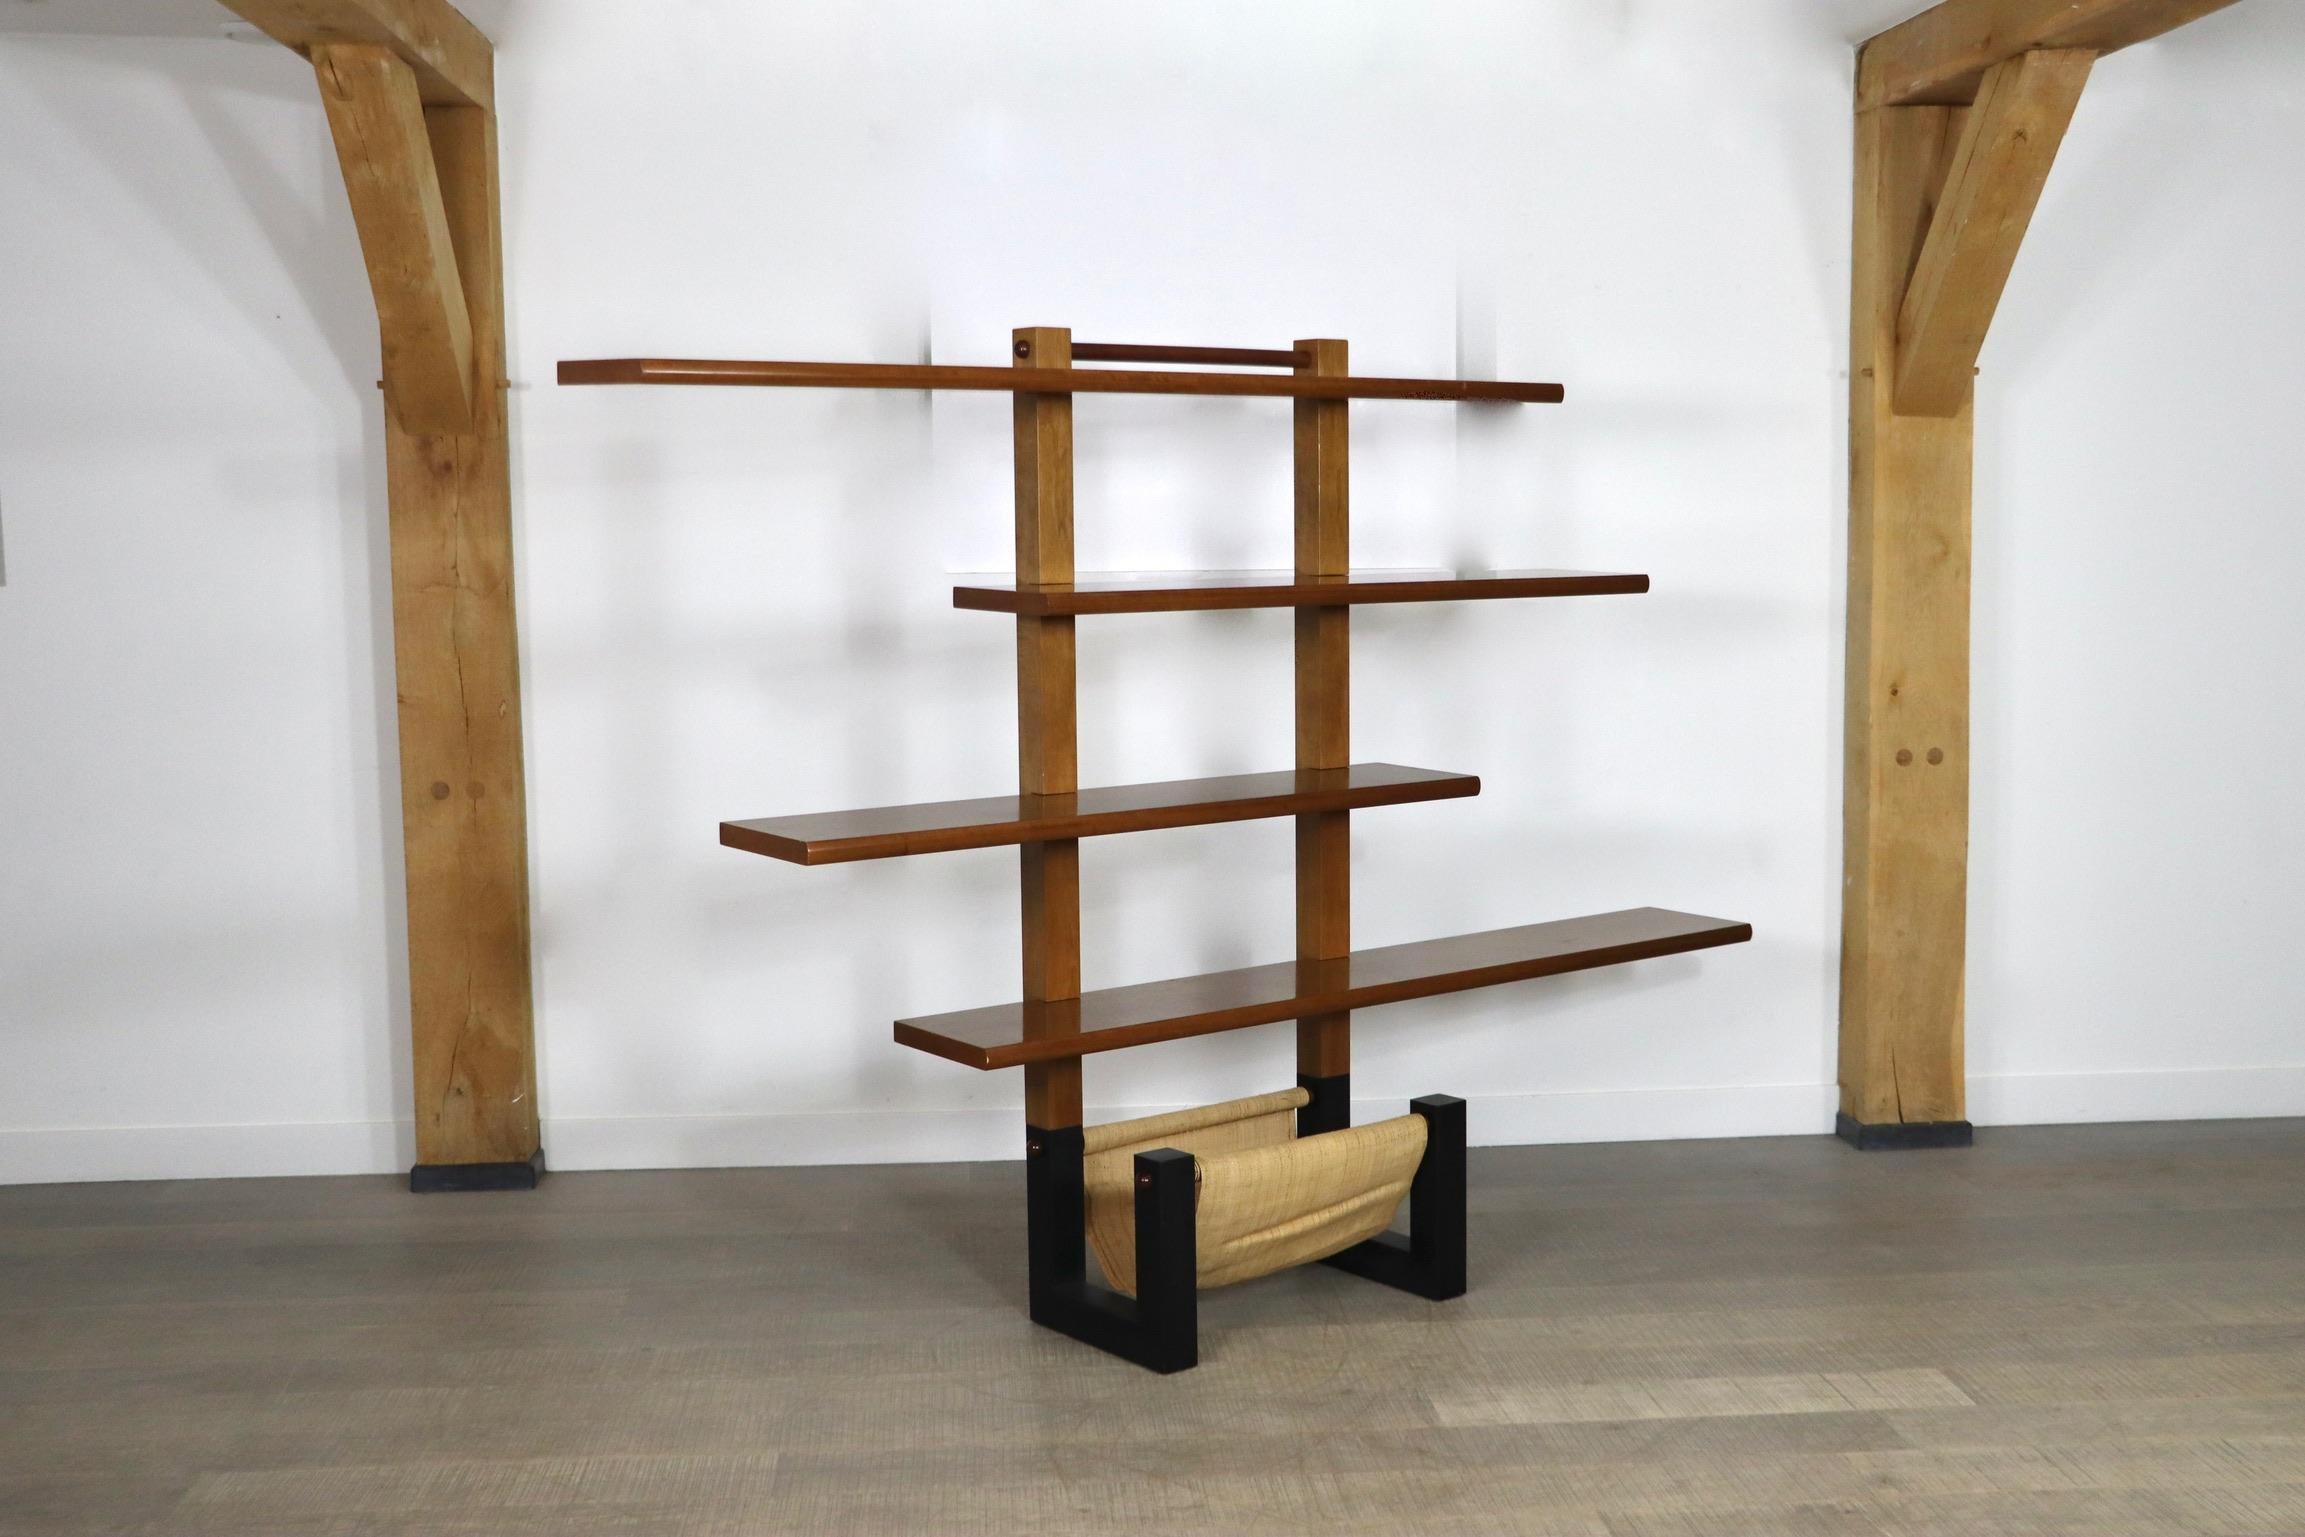 Amazing screw free wall unit in ash wood by Roberto Patio and Renato Toso for Stilwood, Italy, 1970s
This free-standing wall unit could also serve as a room divider. The piece has some great assets which sets it apart from any wall system: the